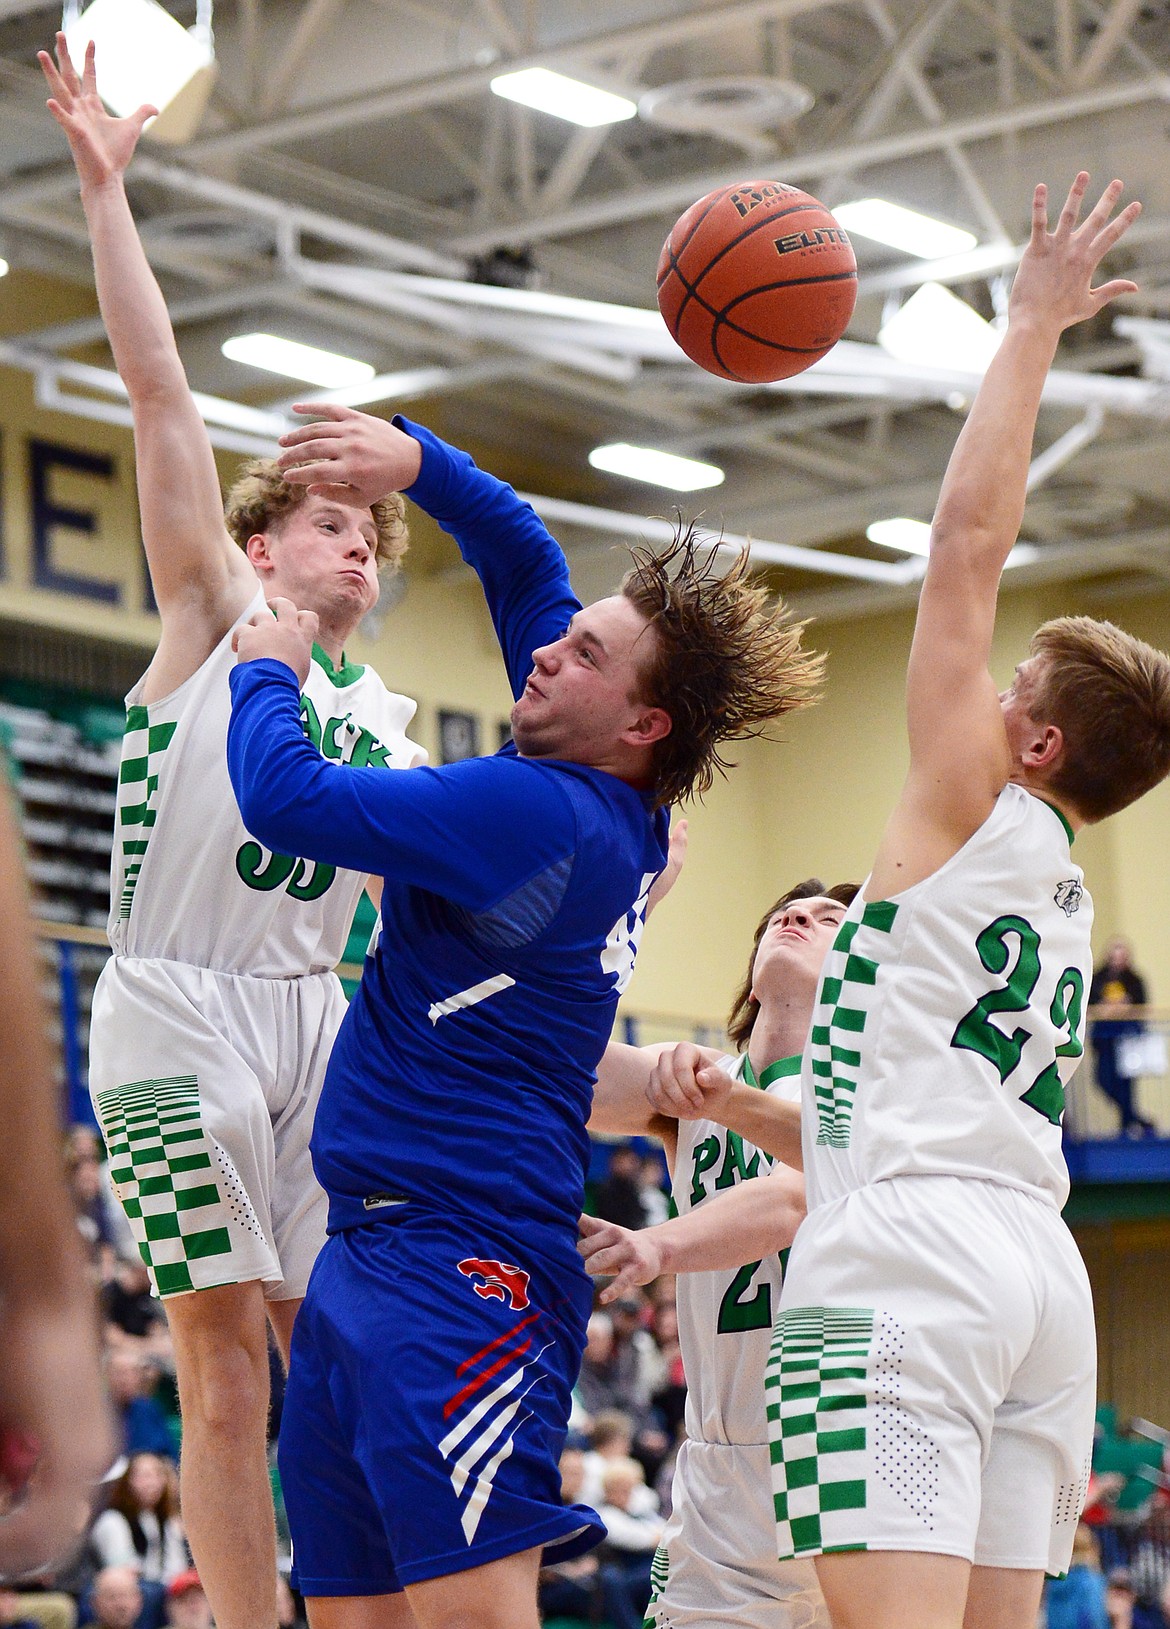 Columbia Falls' Jake Bulawsky battles for a rebound against Glacier's Colin Presnell, left, and Michael Schwarz at Glacier High School on Thursday. (Casey Kreider/Daily Inter Lake)